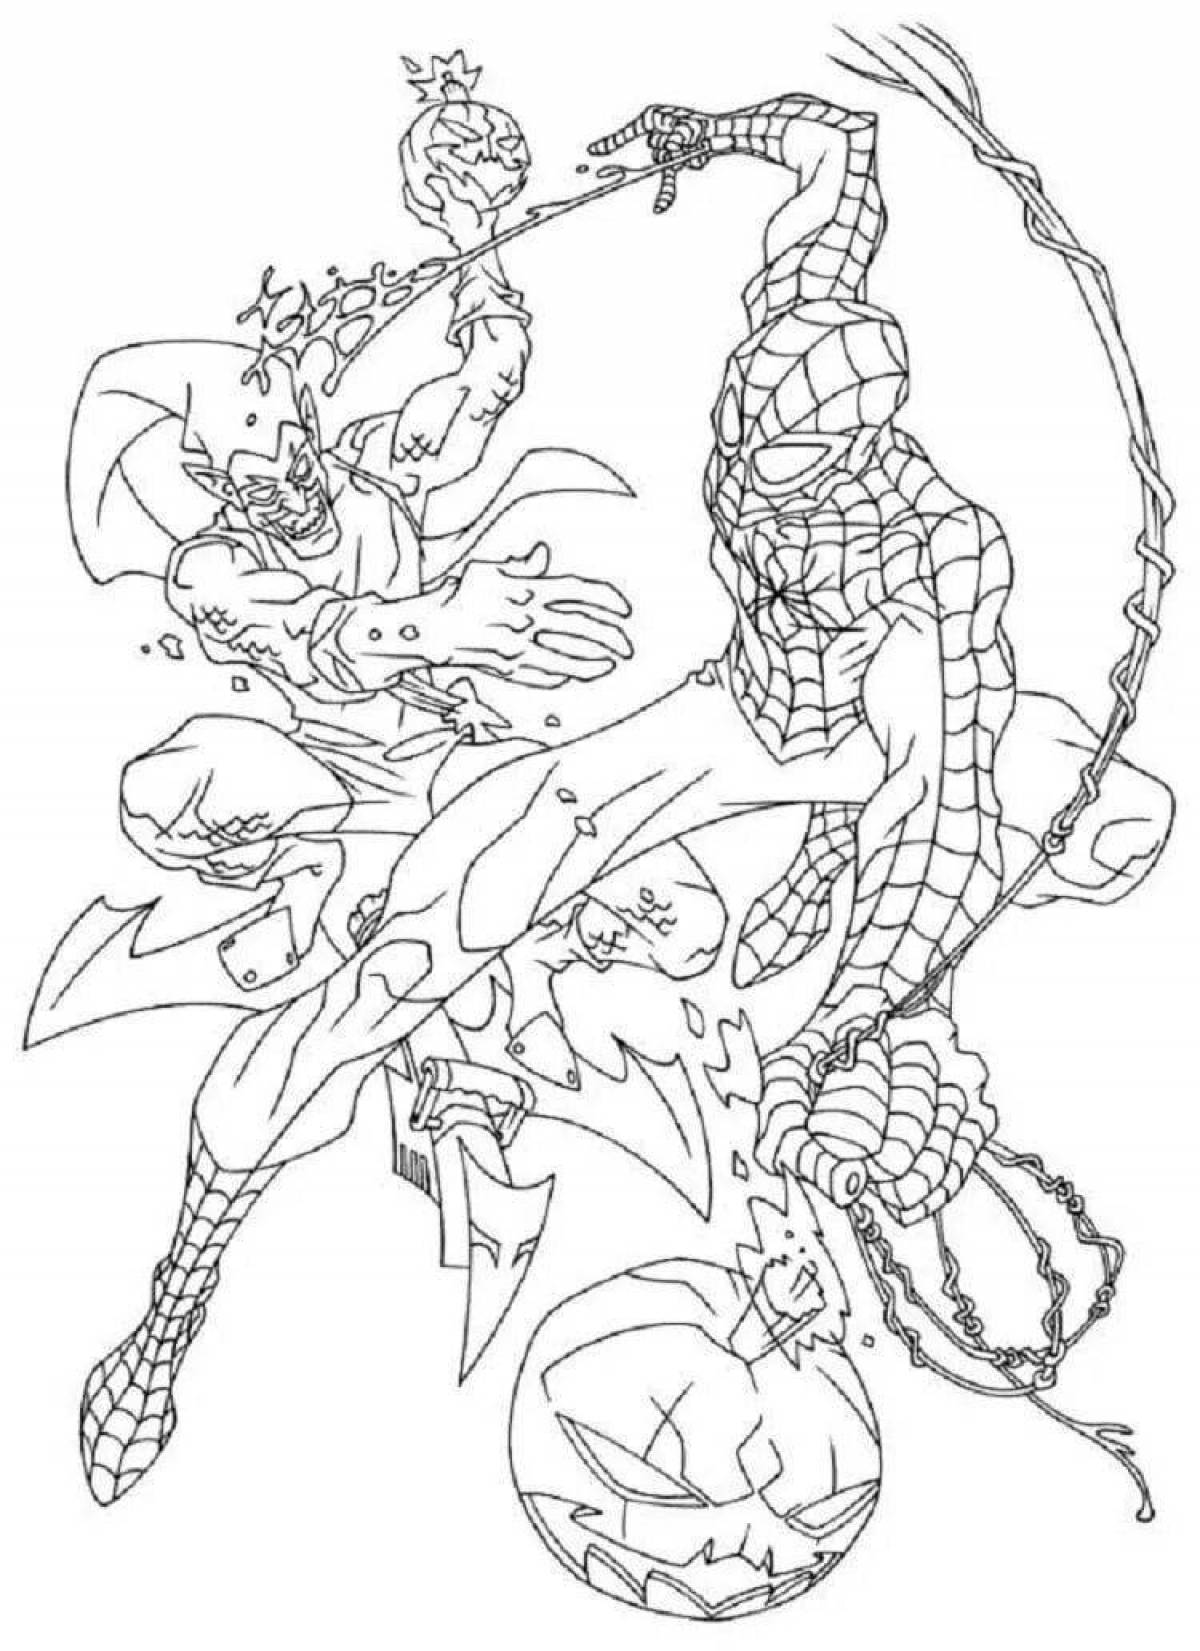 Gorgeous green goblin coloring page